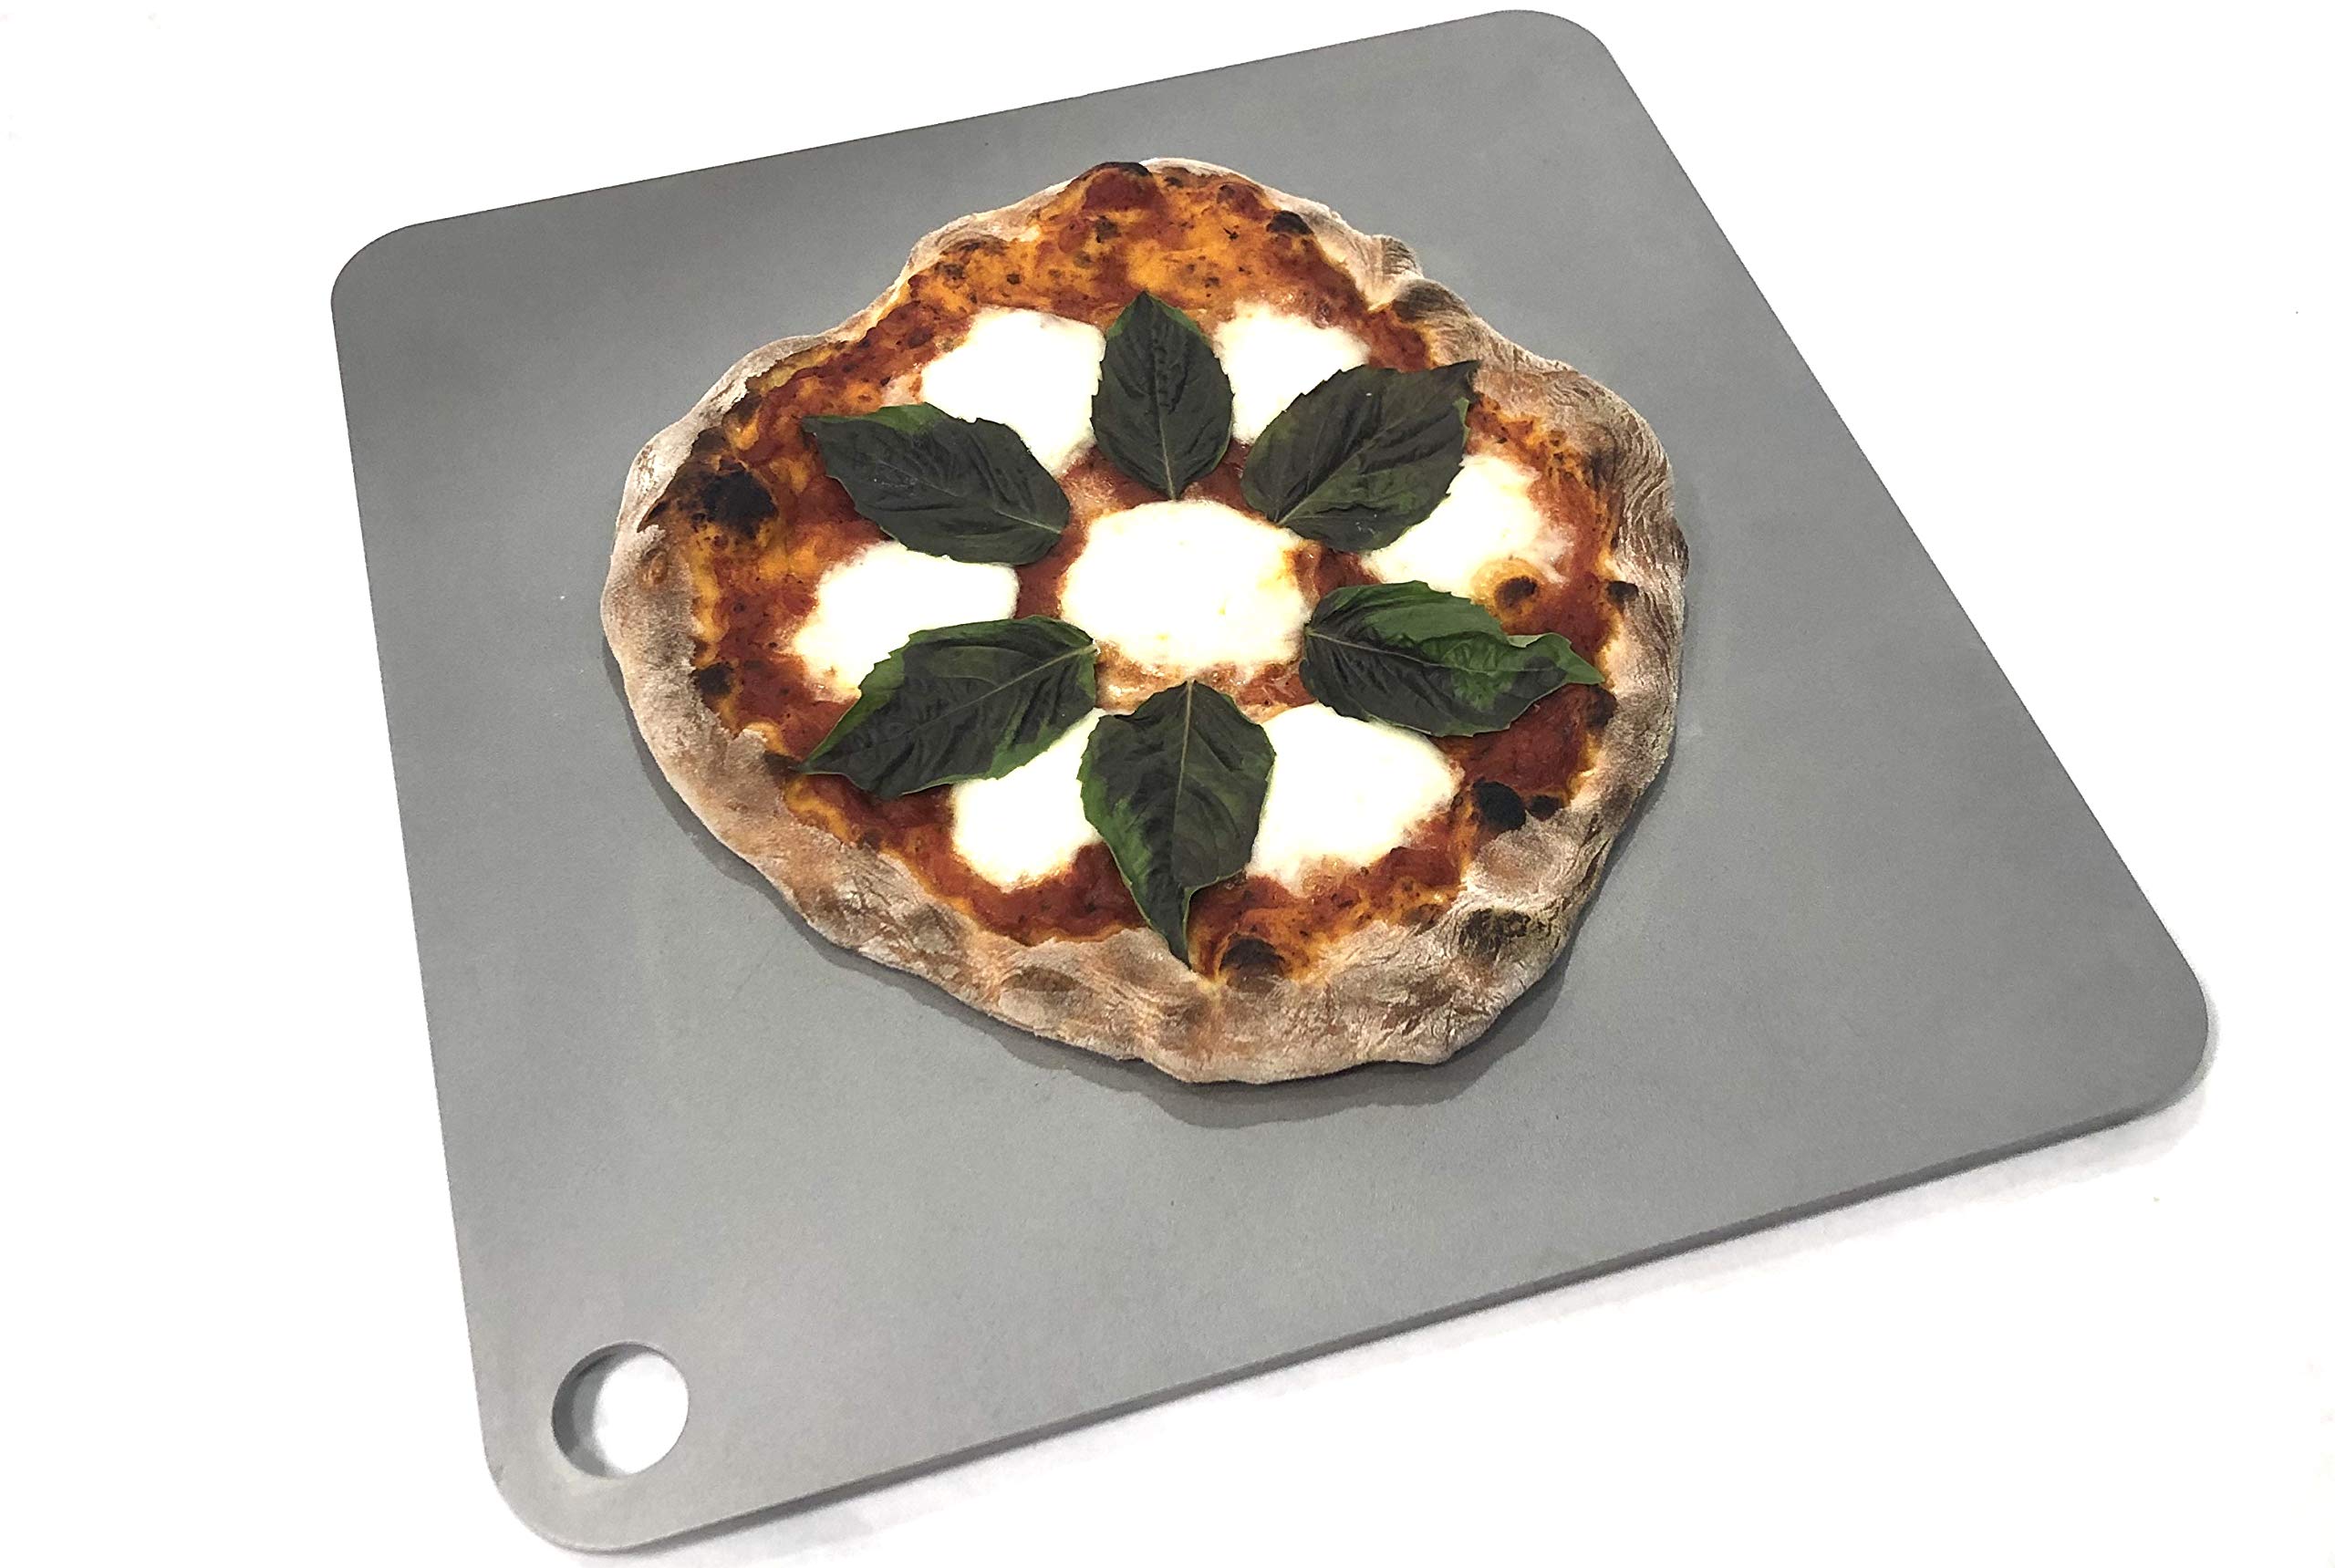 Conductive Cooking - Extra Large Pizza Steel Plate for Oven Cooking and Baking (3/8